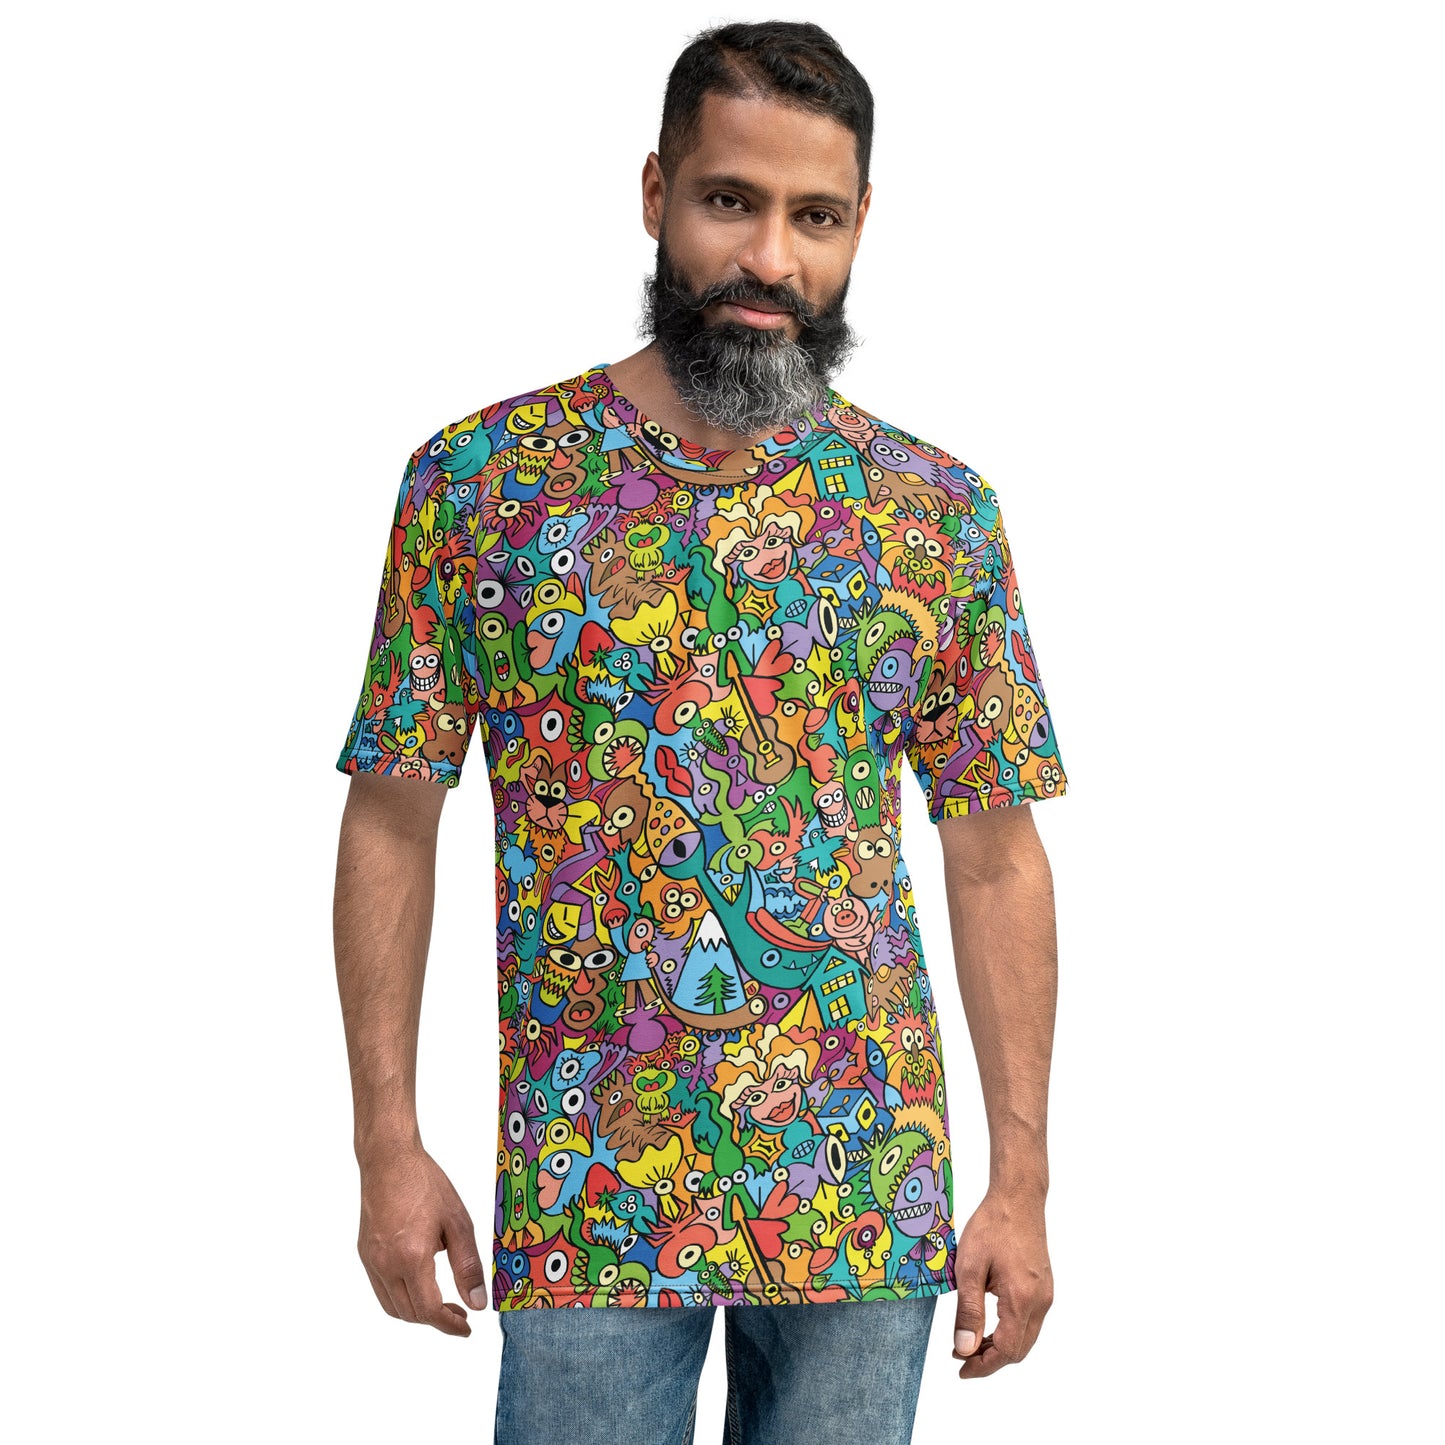 Cheerful crowd enjoying a lively carnival Men's T-shirt. Front view